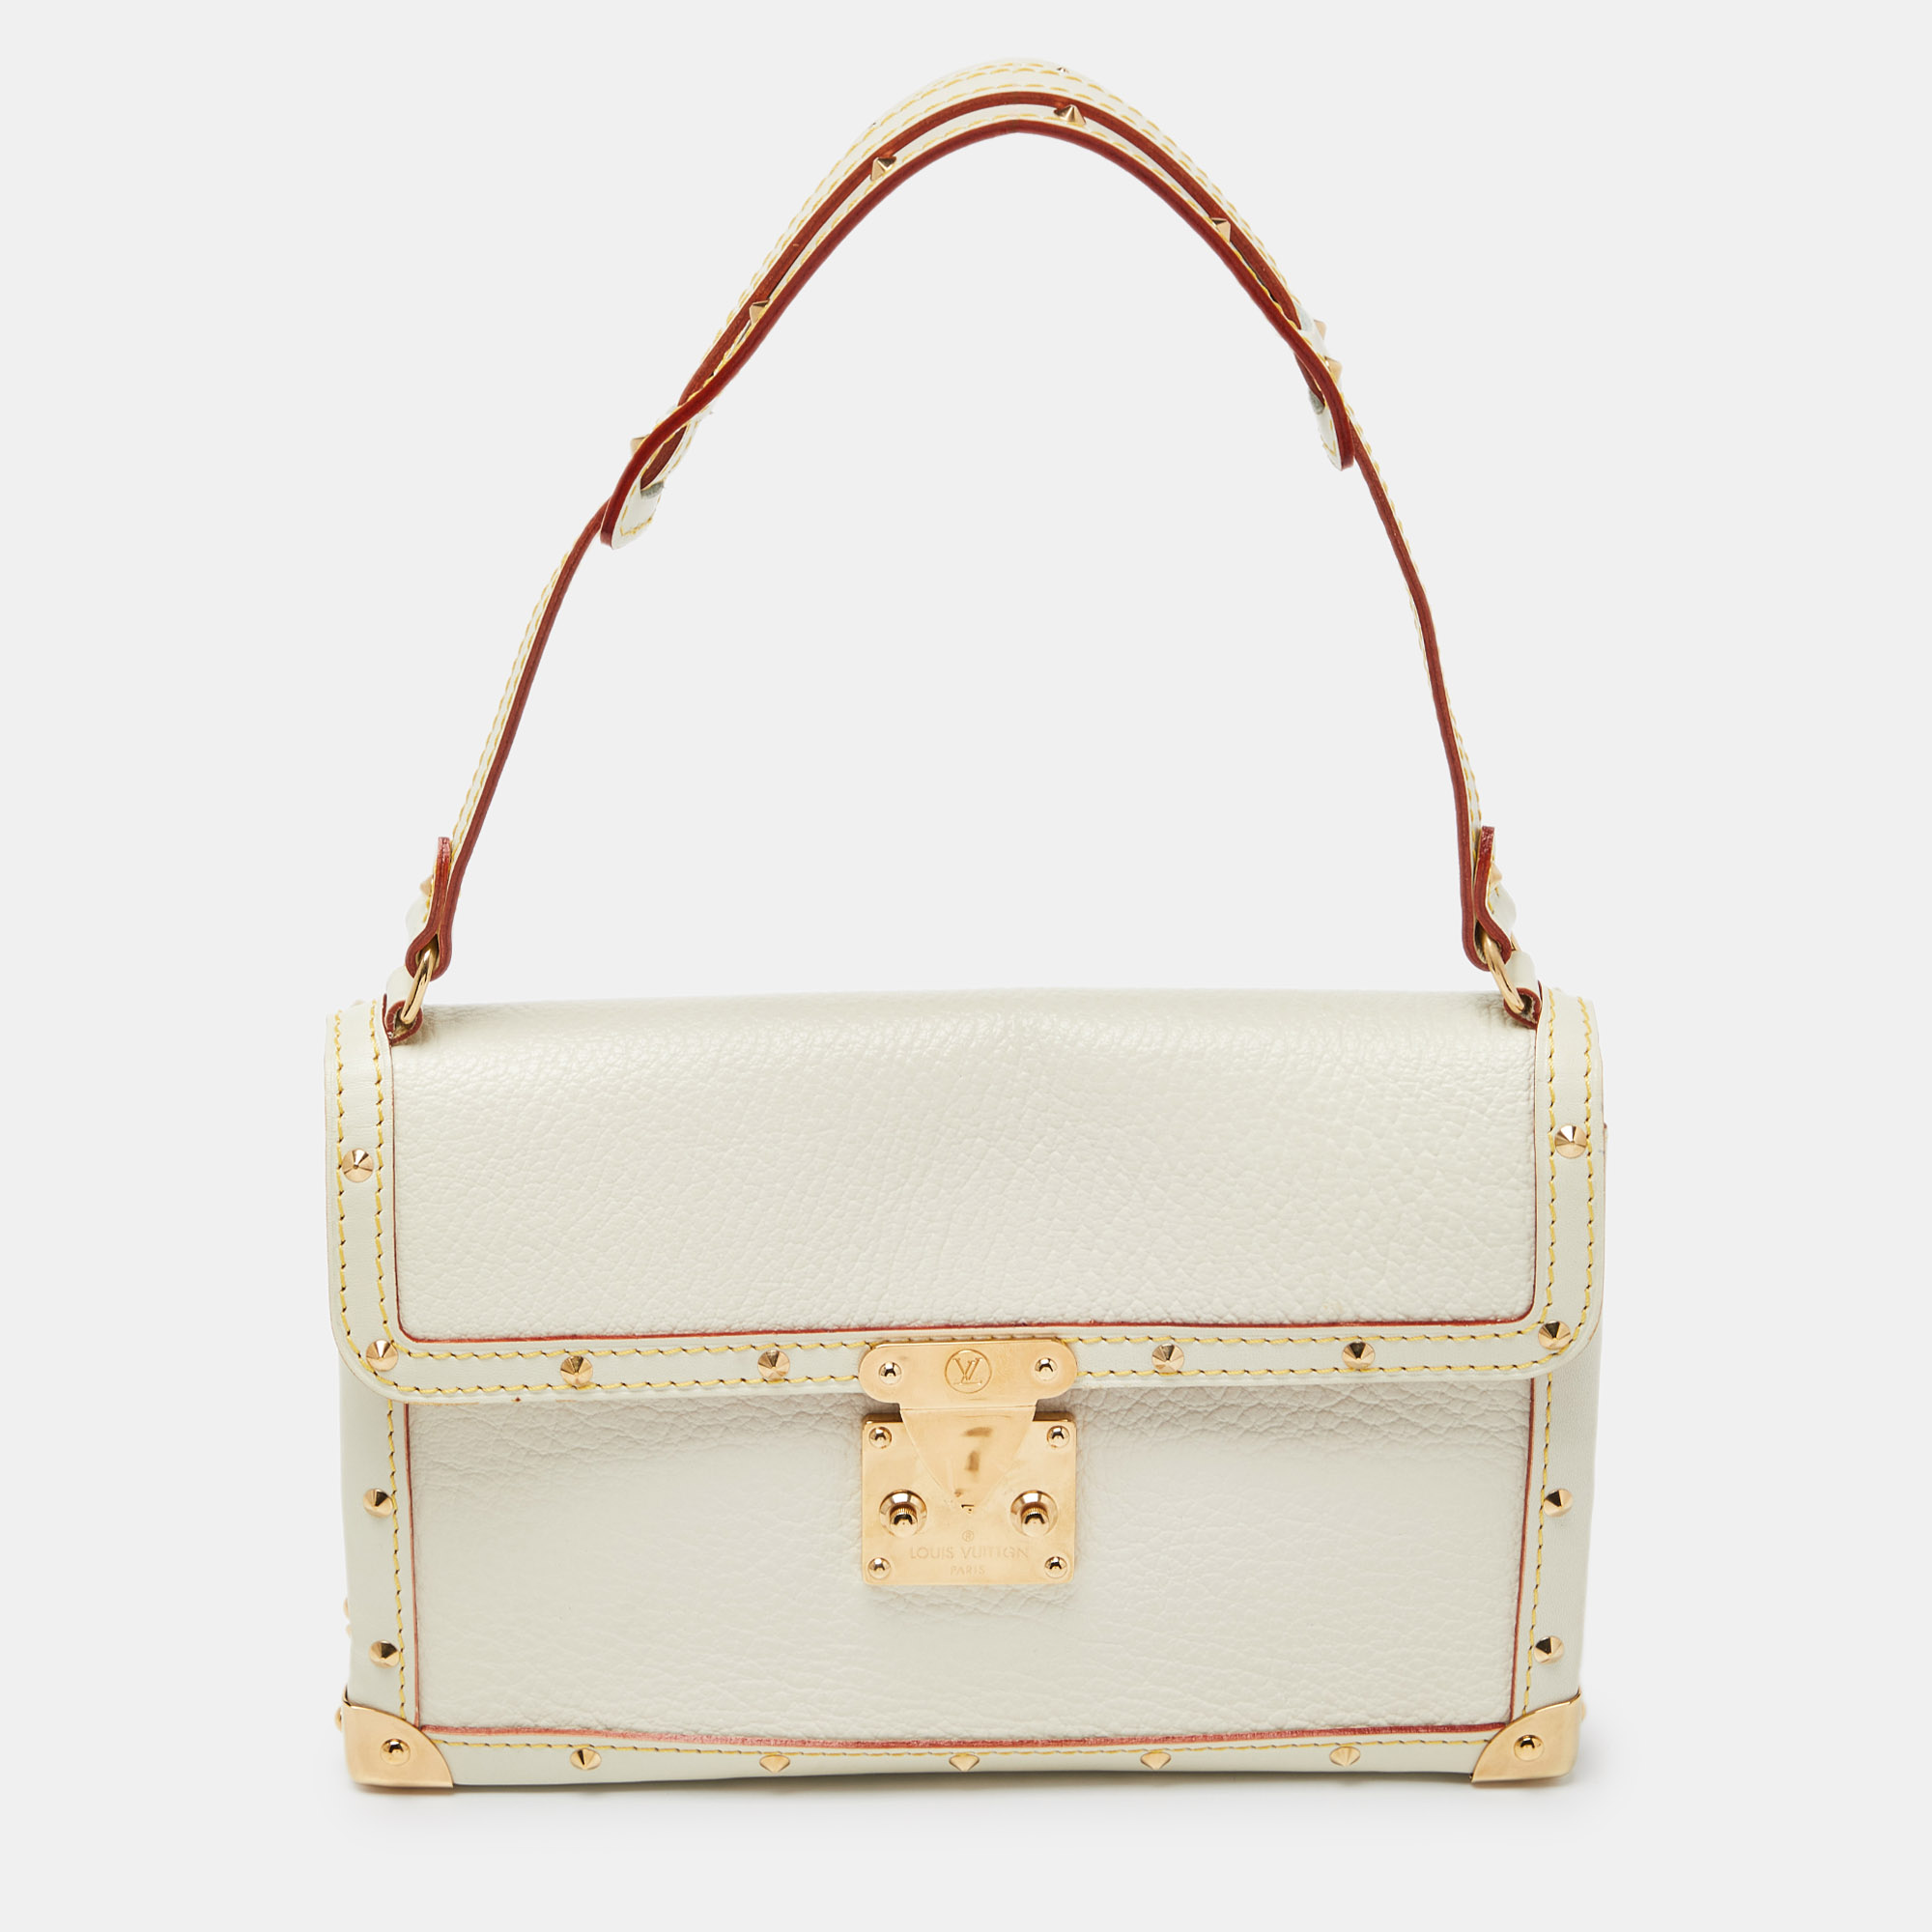 Louis vuitton white suhali leather l'aimable bag